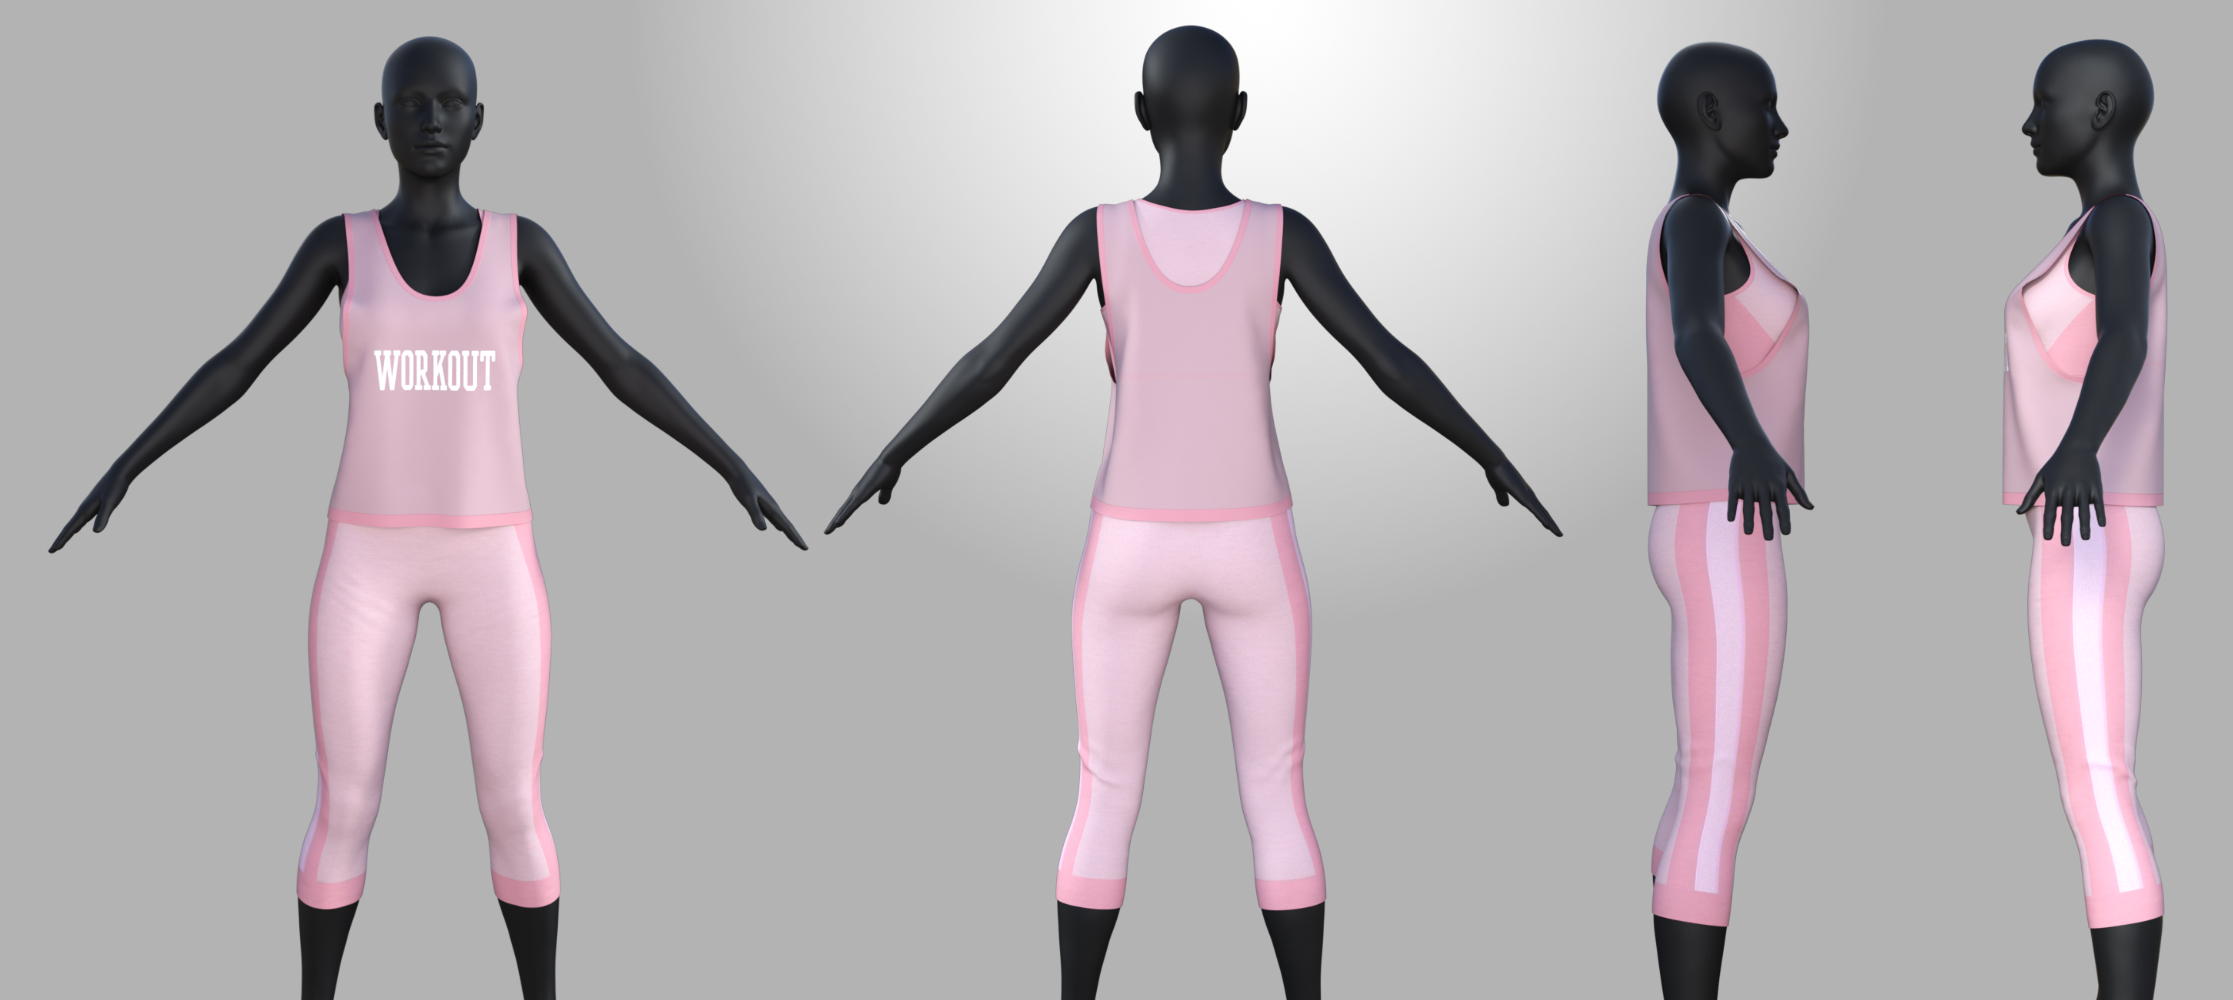 FG Workout Outfit for Genesis 8 and 8.1 Females by: Ironman, 3D Models by Daz 3D